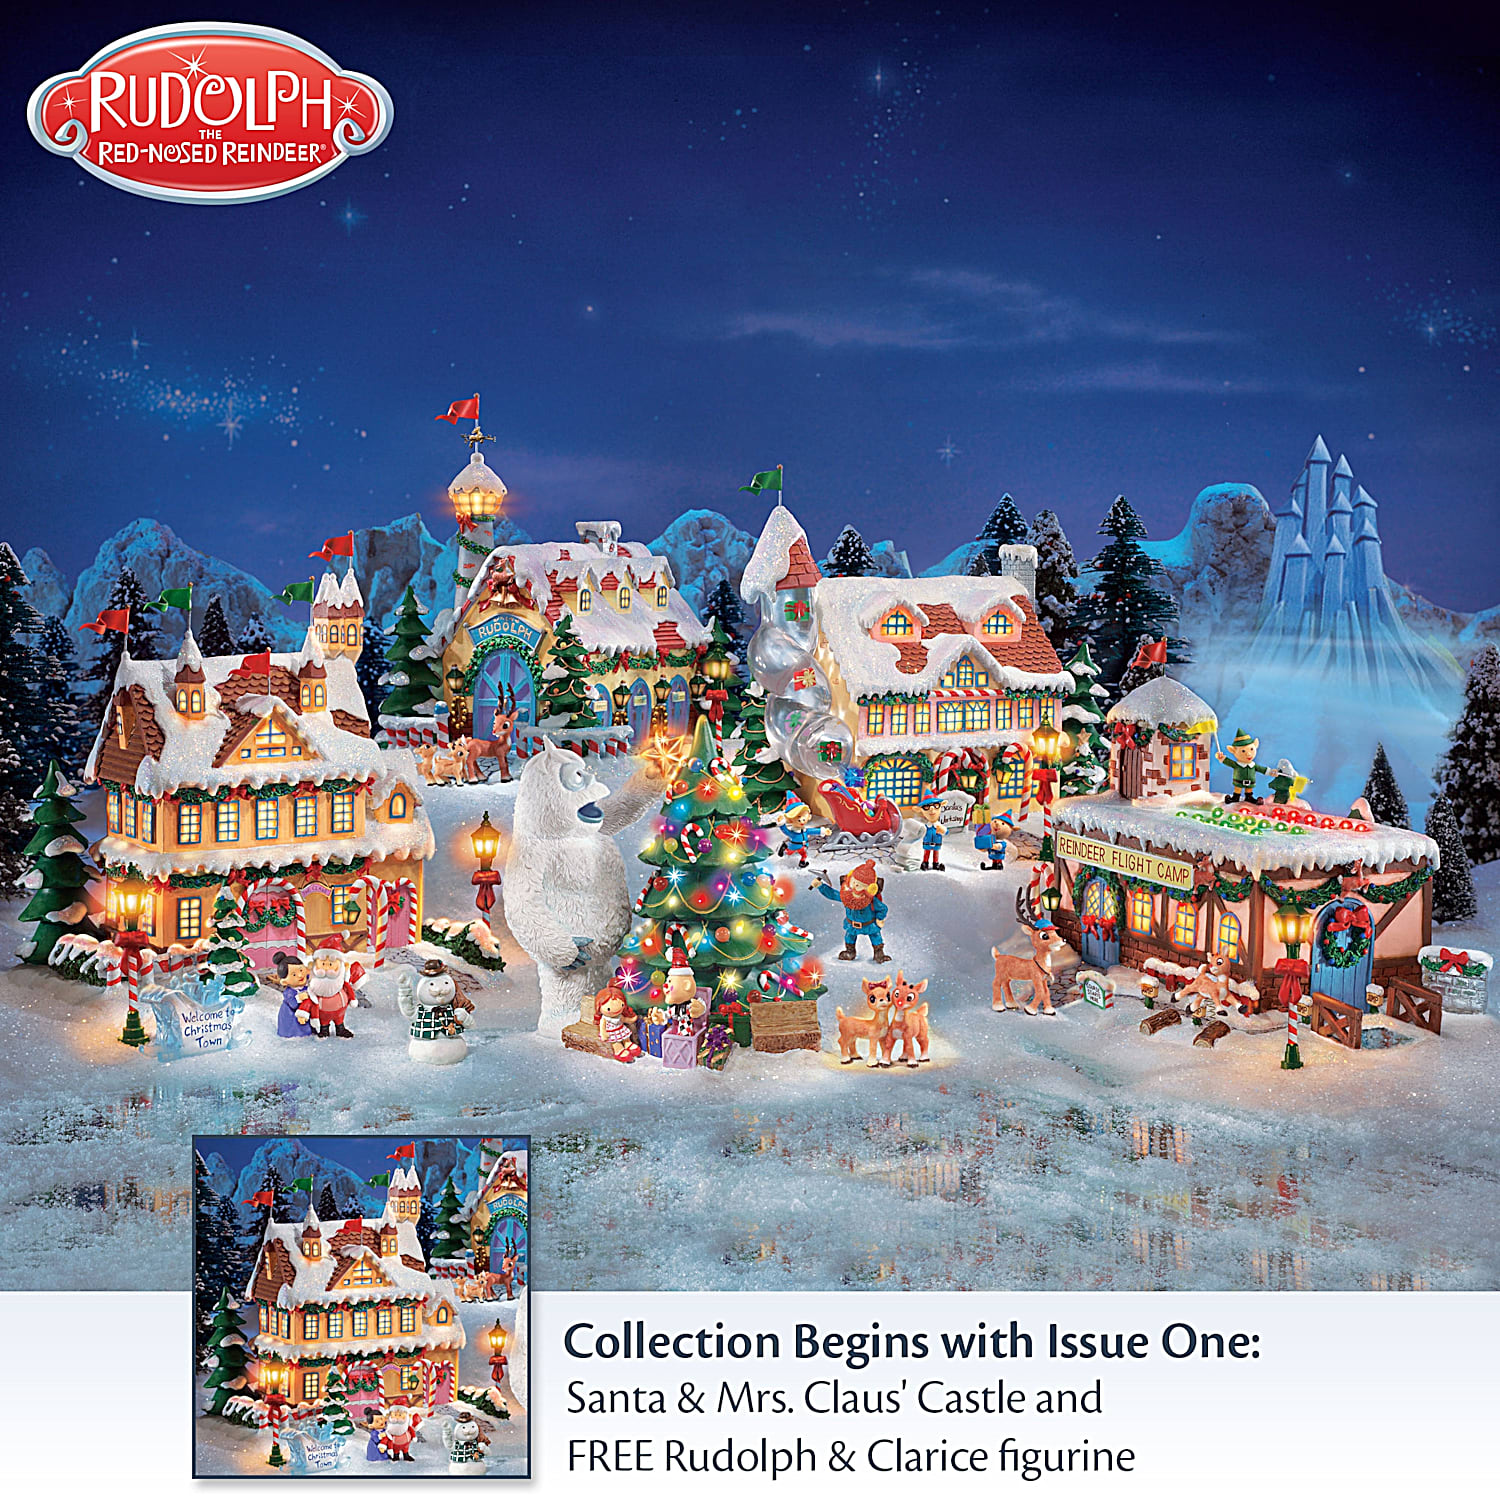 cocodrilo pecho Emperador Rudolph The Red-Nosed Reindeer® Christmas Town Village Collection